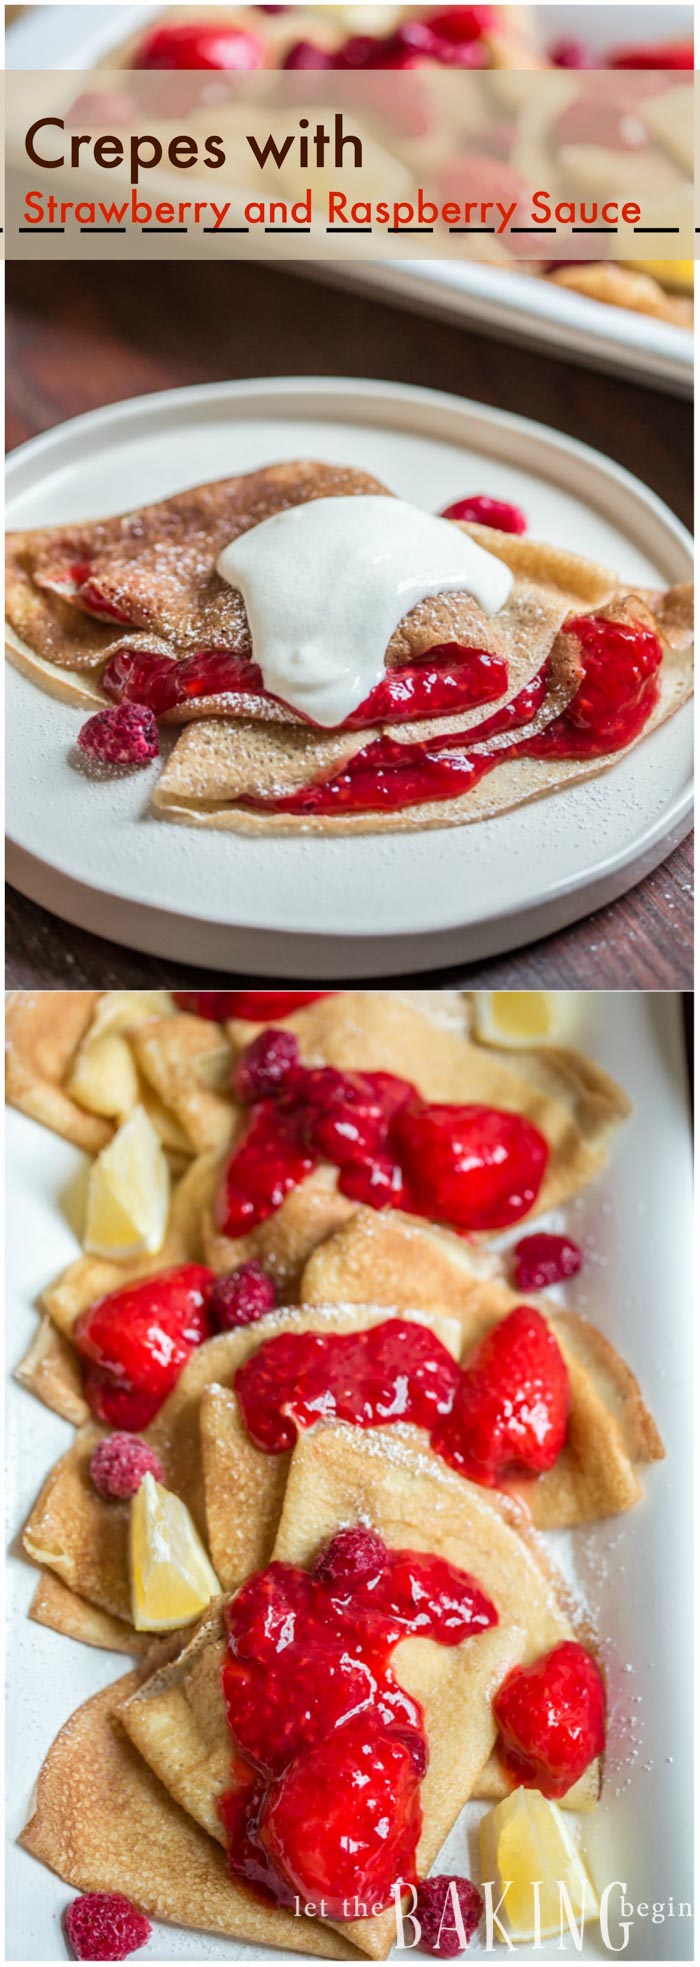 Crepes with Strawberry and Raspberry Sauce | Let the Baking Begin!